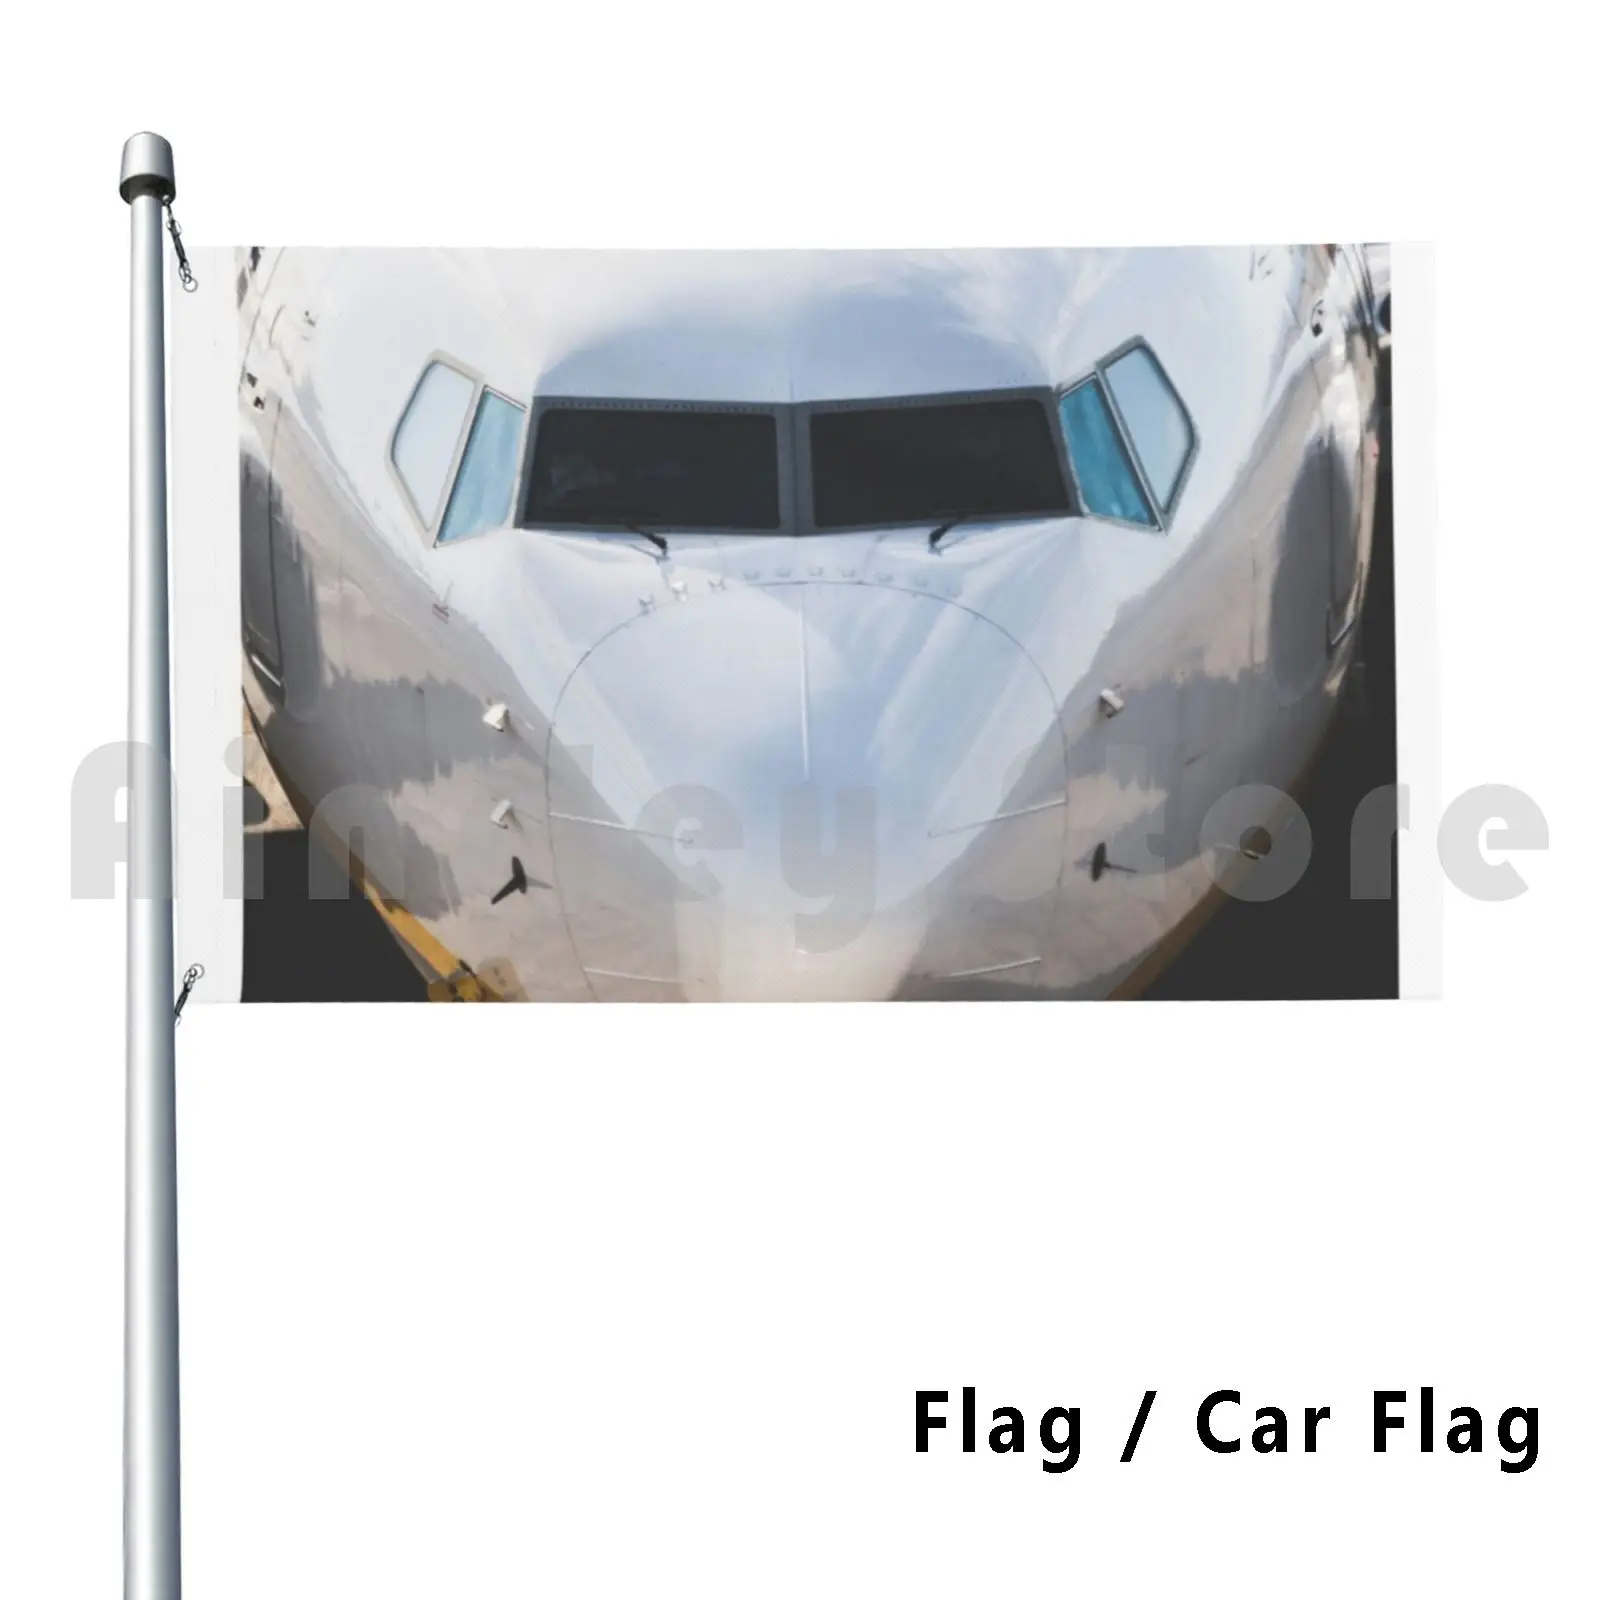 Boeing 737 Front Nose Profile Outdoor Decor Flag Car Flag Aviation Boeing Pilot Airplane Flight Flying Airport Plane